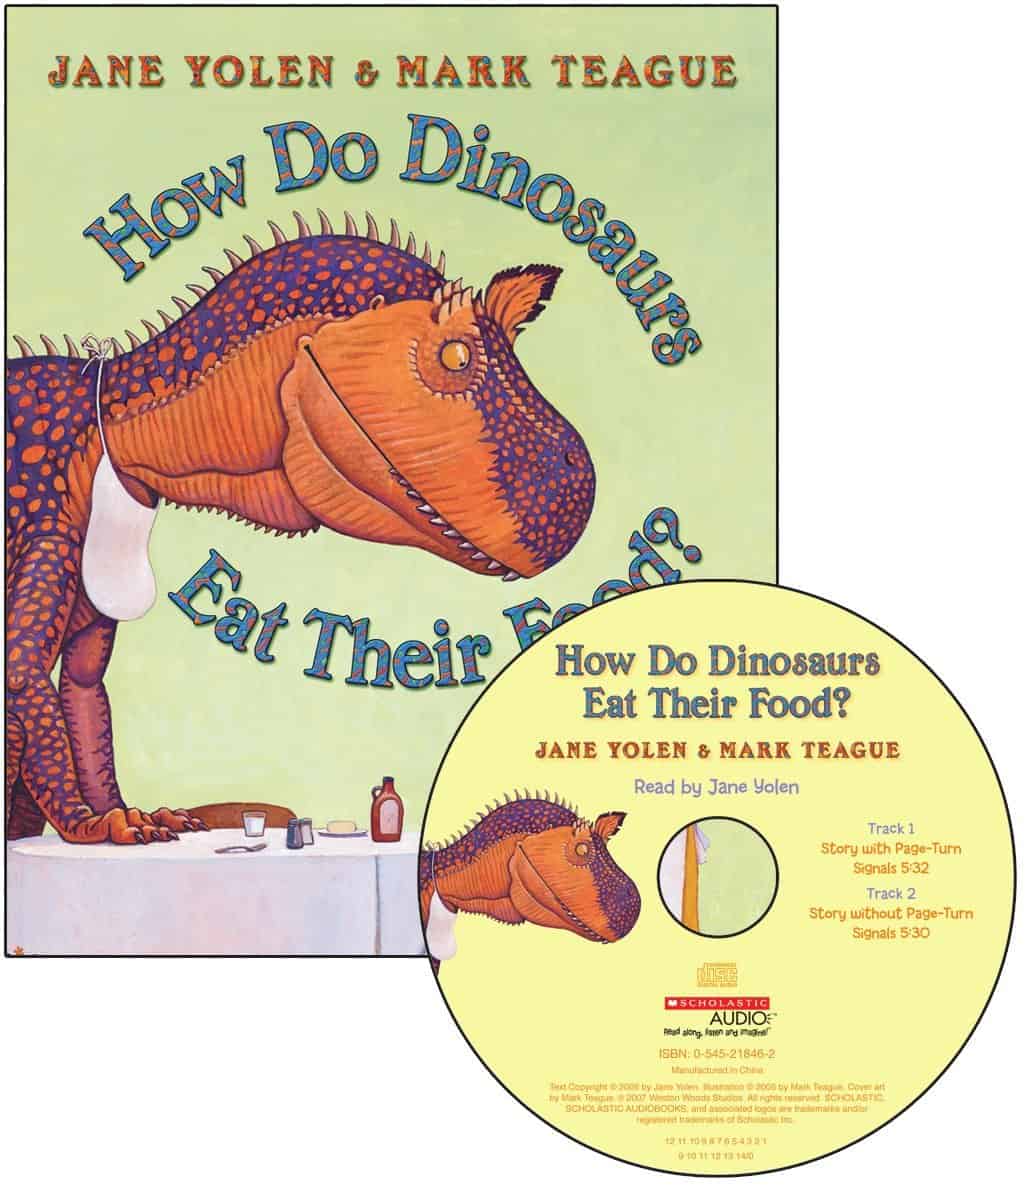 How Dinosaurs Eat Their Food by Jane Yolen